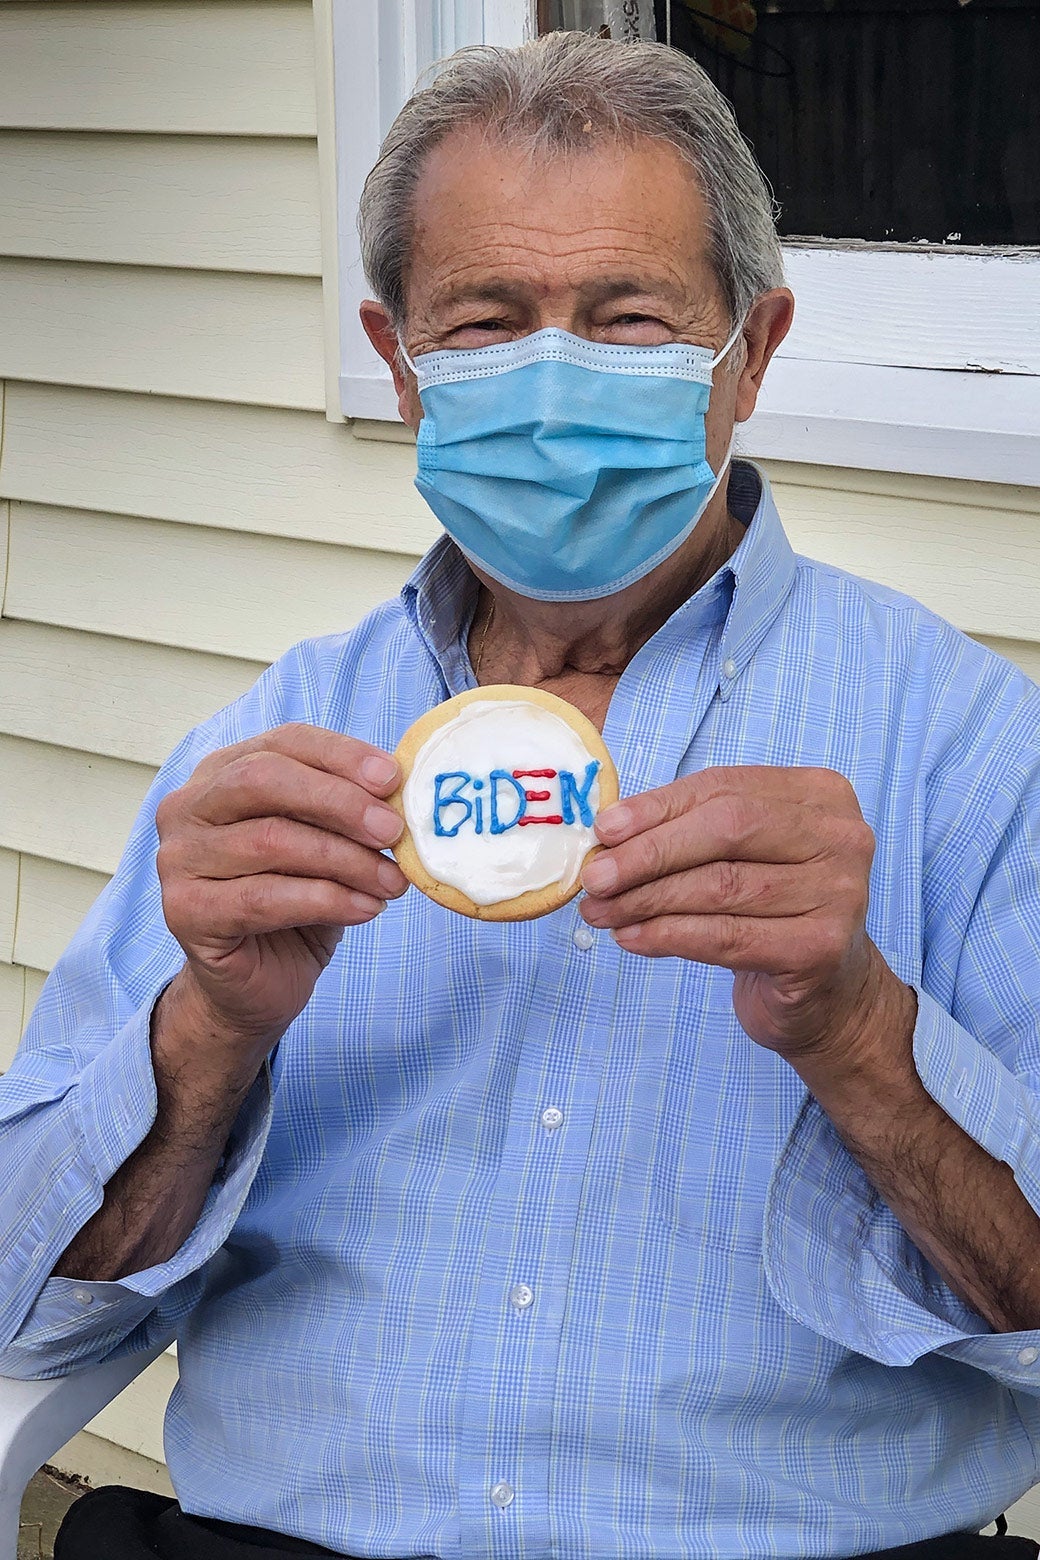 Pasquale wearing a mask and holding a cookie that says Biden on it.